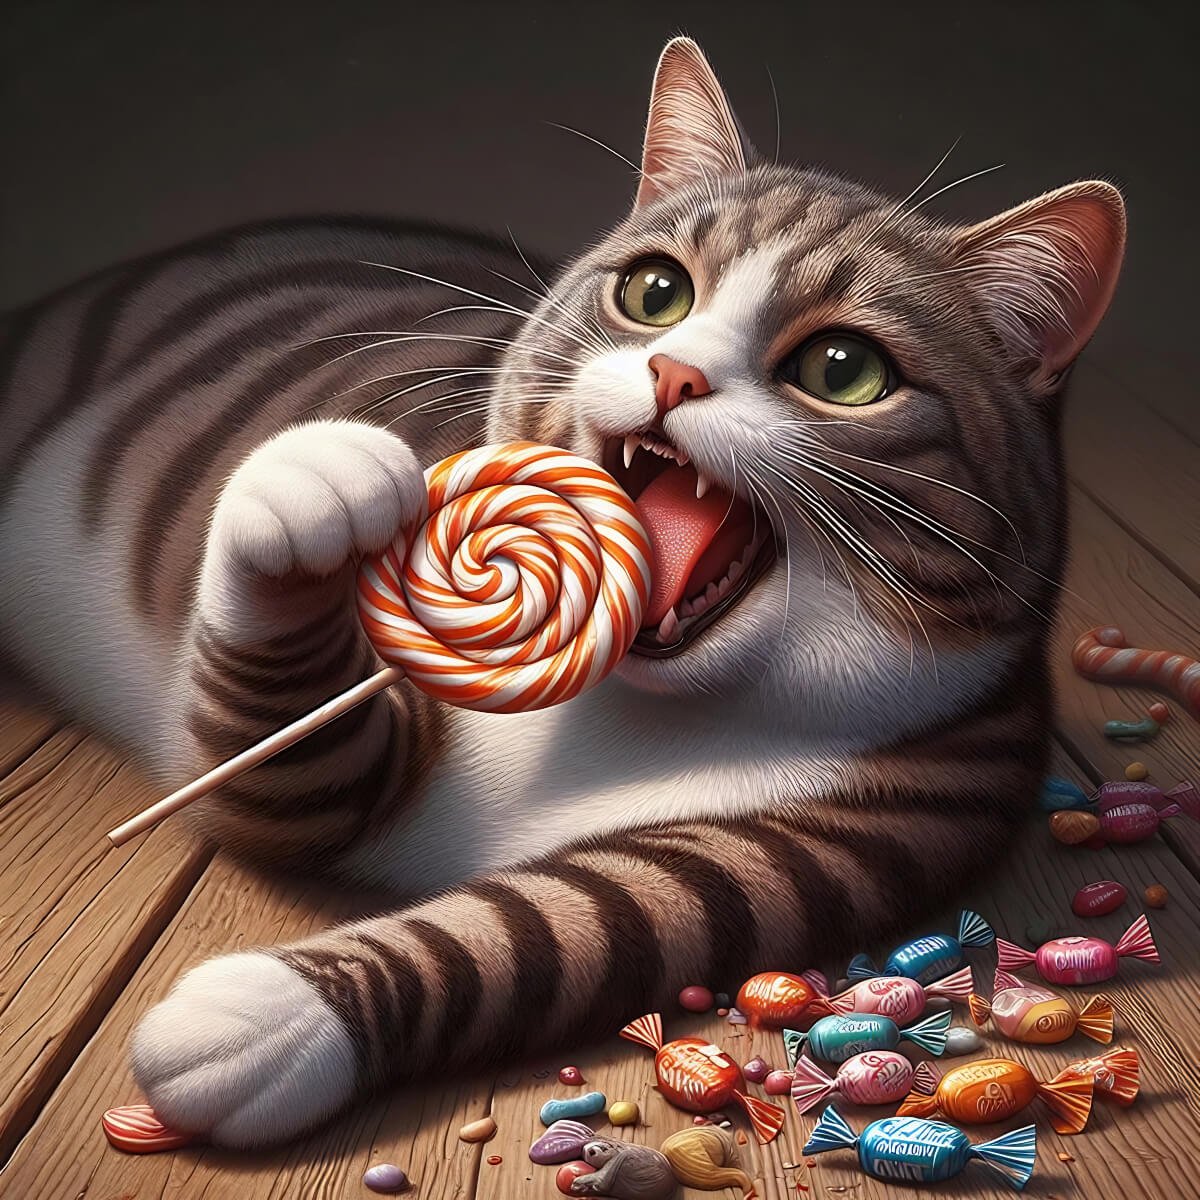 Illustration of a striped cat eating a lollipop, surrounded by sweets